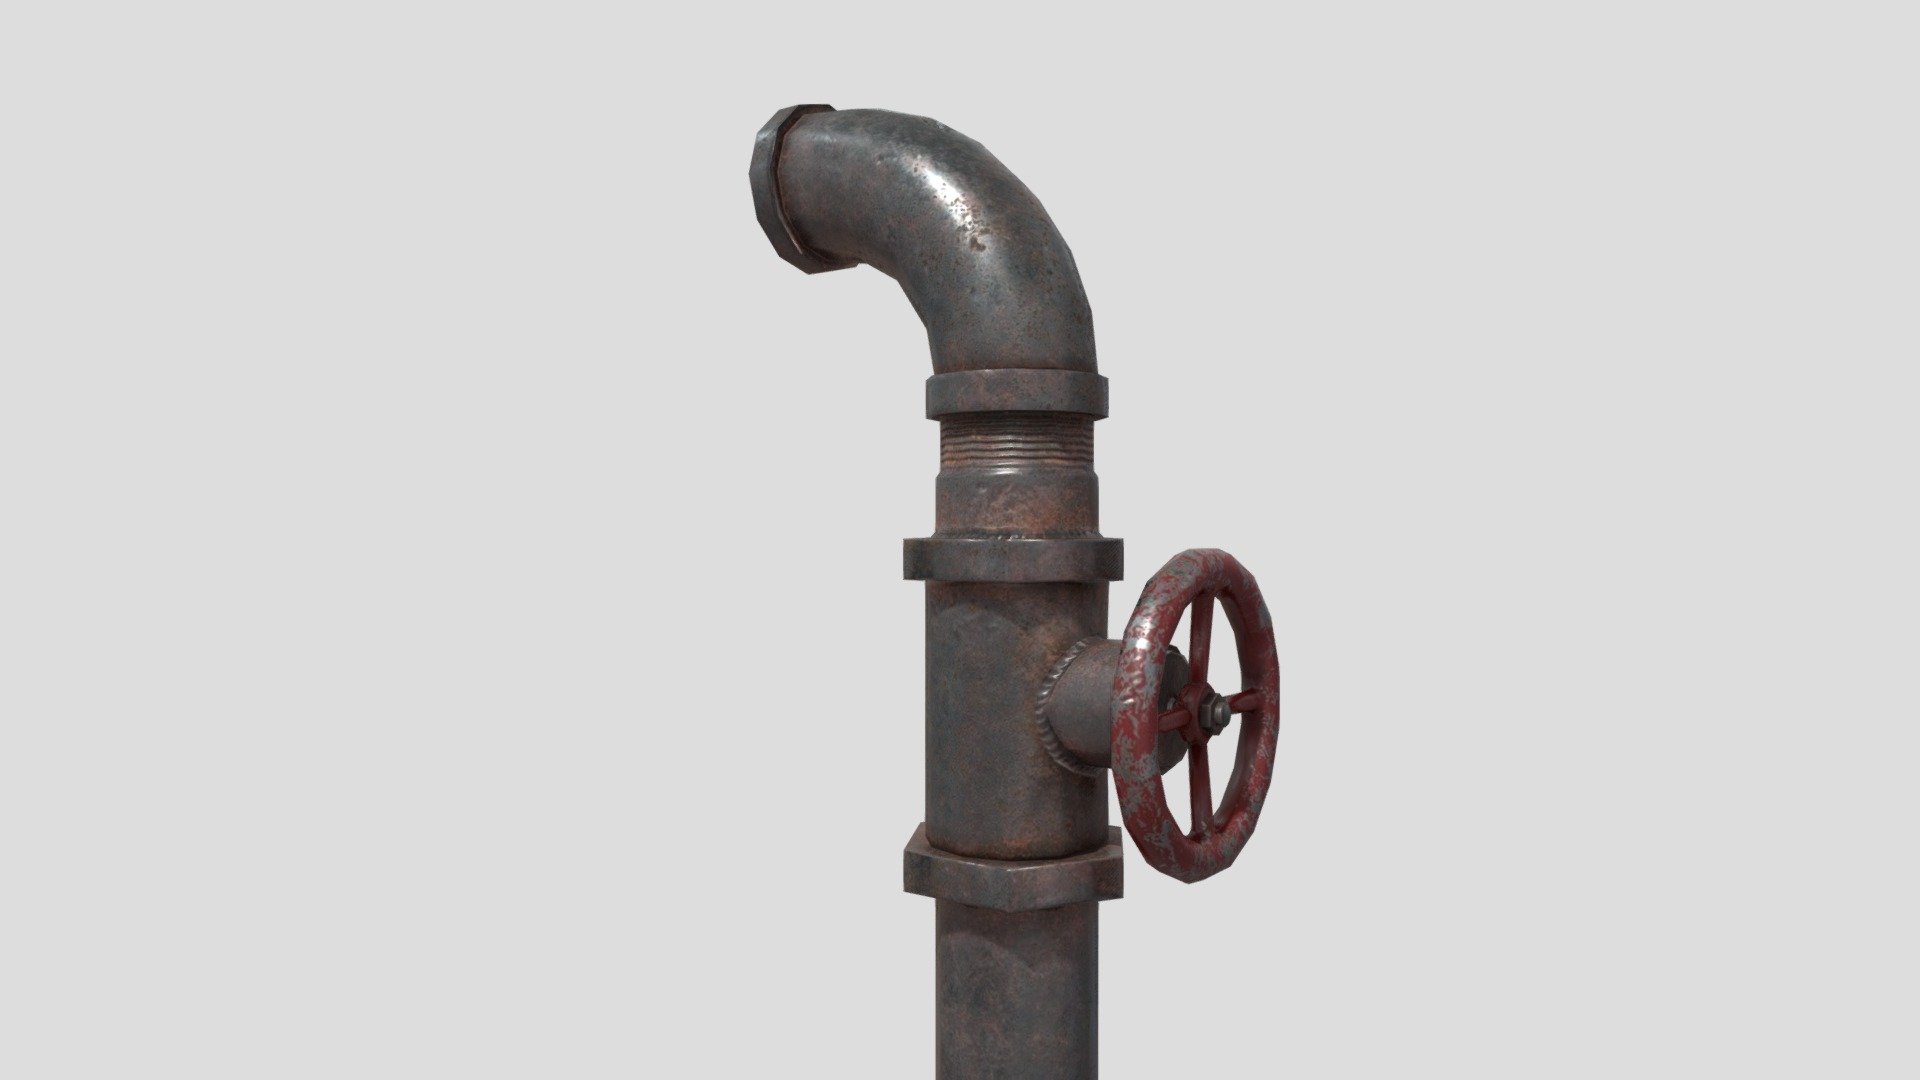 Low poly game ready pipe
textures 1k - Tube - 3D model by Hurricane (@pavelsmith15) 3d model